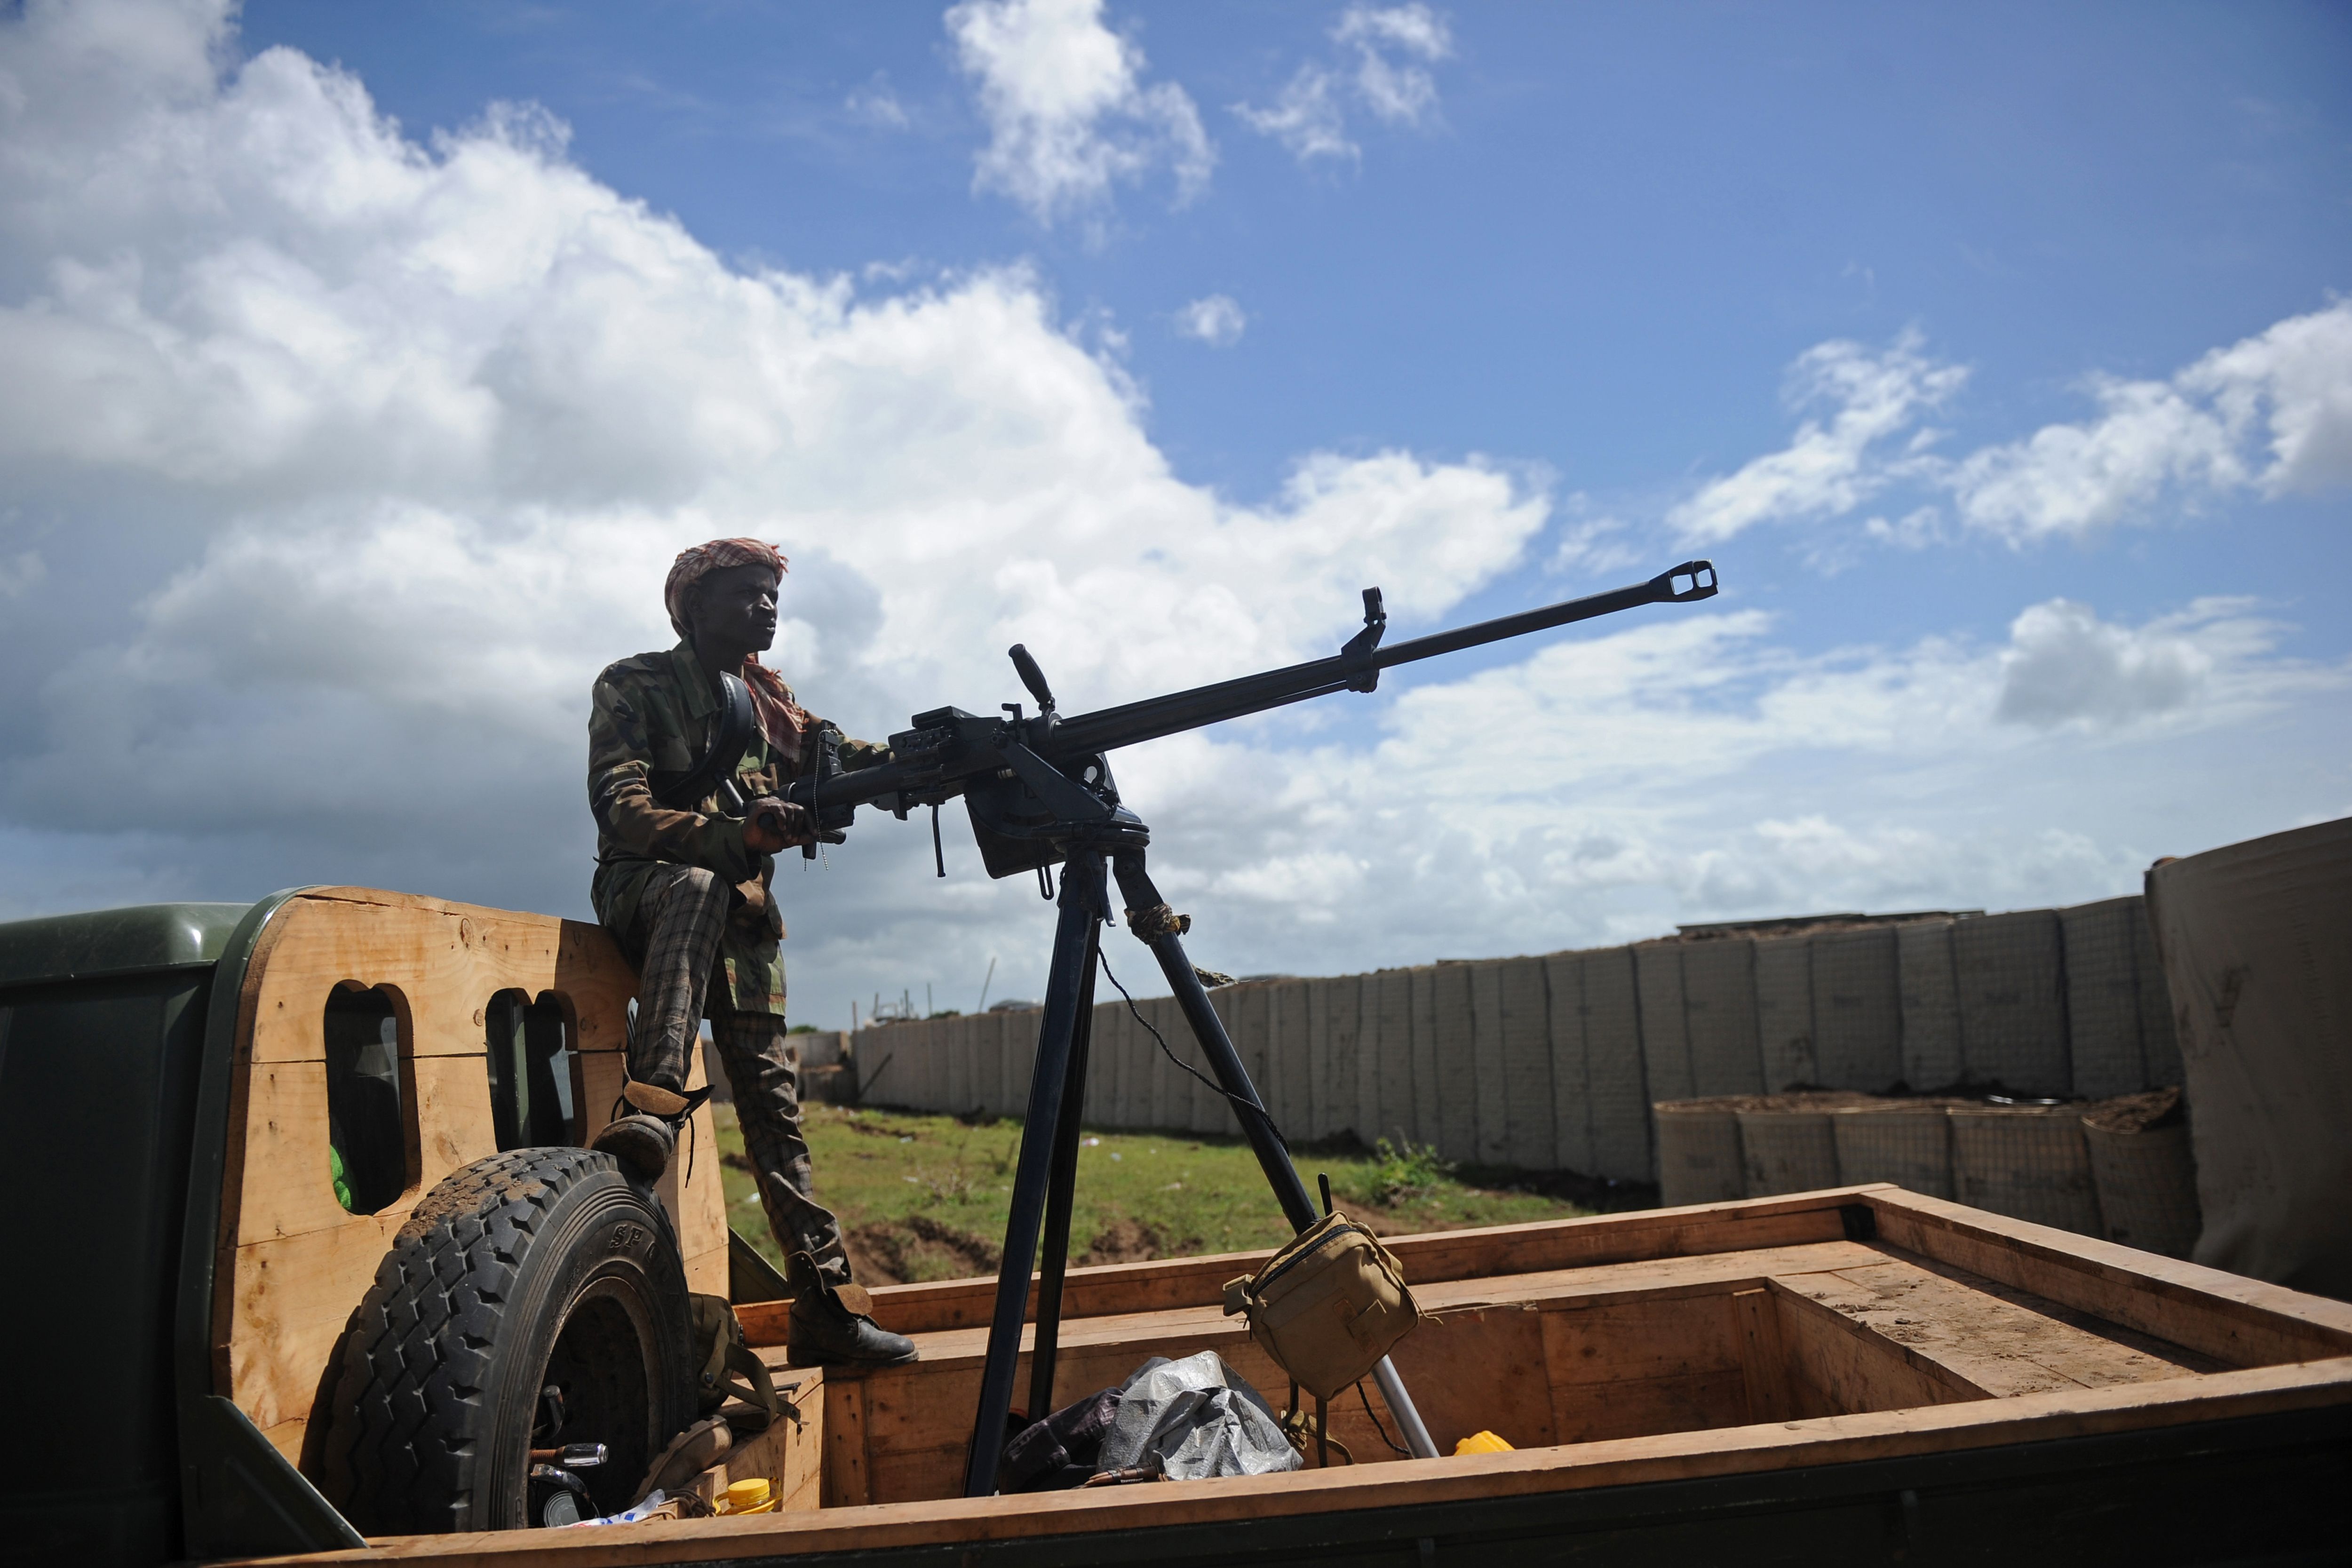 A Somali soldier holds a machine gun at Sanguuni military base, where an American special operations soldier was killed by a mortar attack on June 8, about 450 km south of Mogadishu, Somalia, on June 13, 2018. - More than 500 American forces are partnering with African Union Mission to Somalia (AMISOM) and Somali national security forces in counterterrorism operations, and have conducted frequent raids and drone strikes on Al-Shabaab training camps throughout Somalia. (Photo by MOHAMED ABDIWAHAB/AFP/Getty Images)